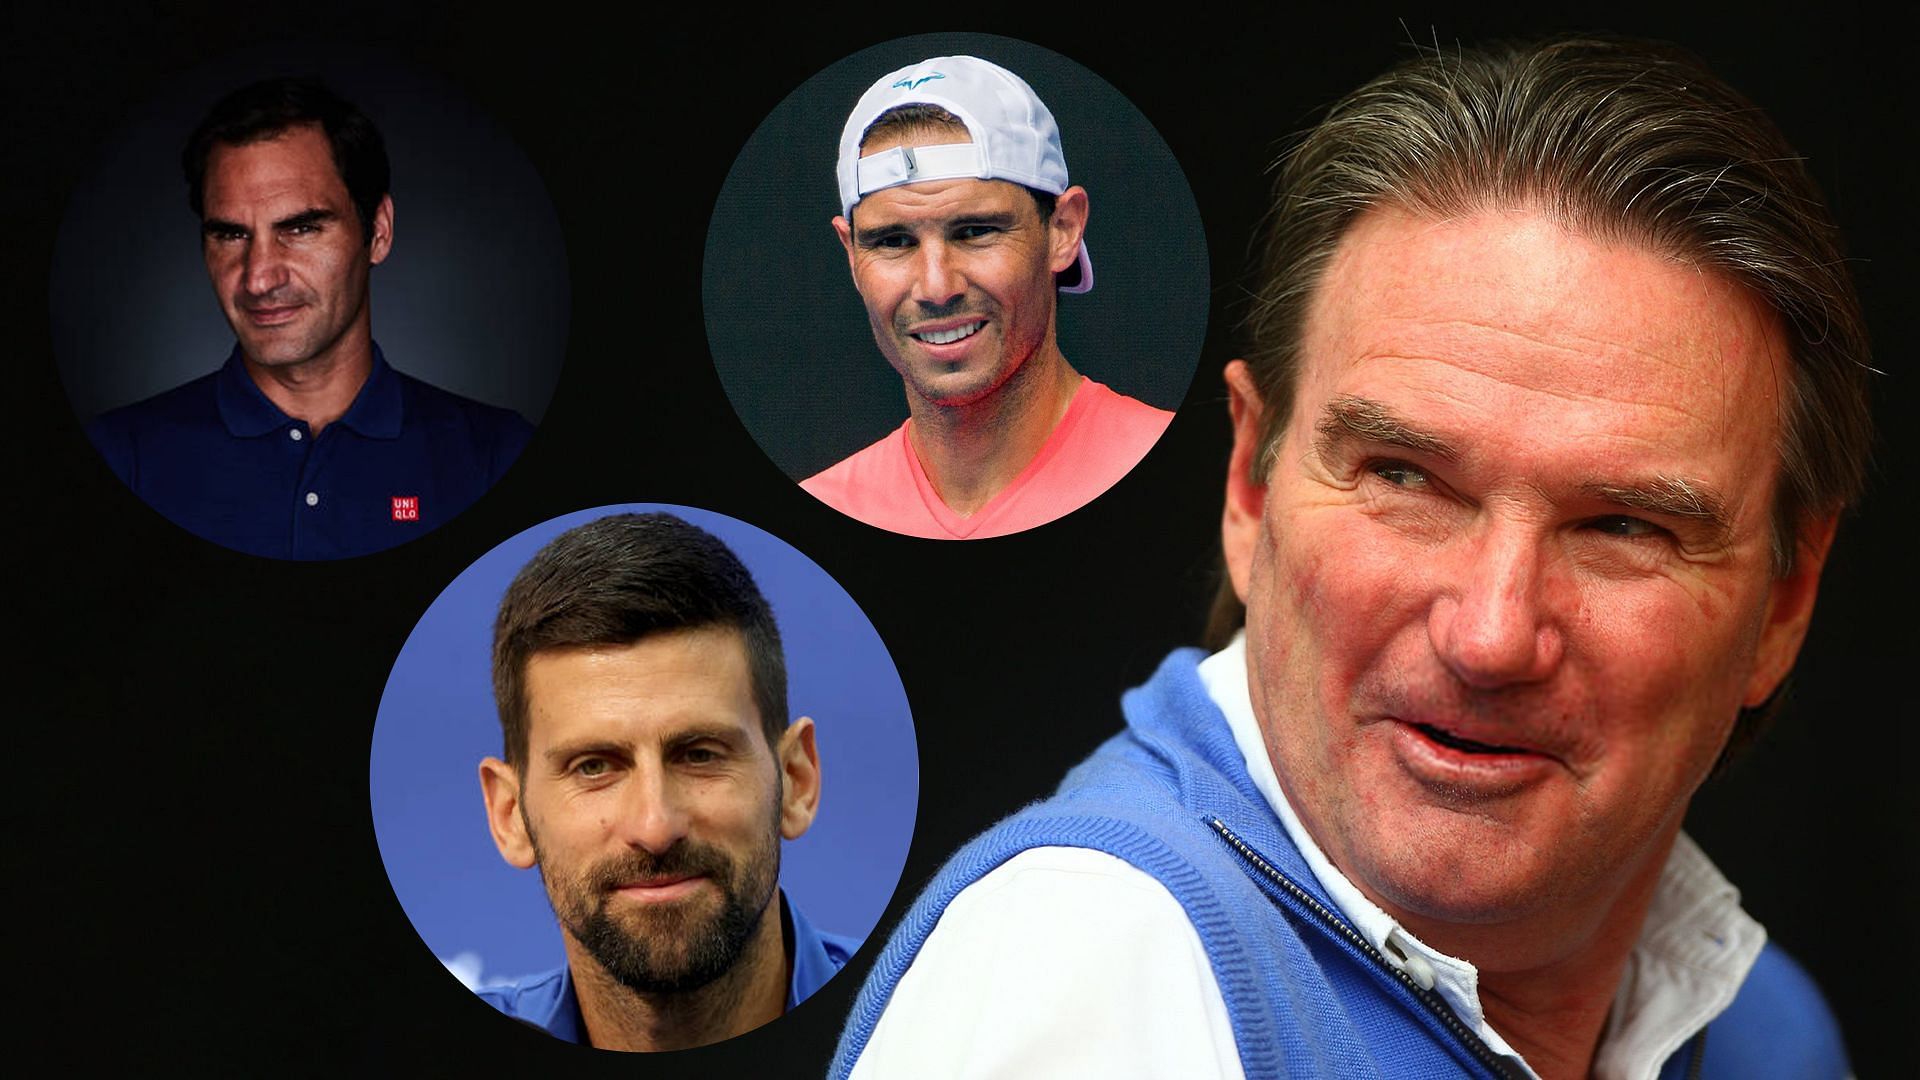 Jimmy Connors has made his stance towards tennis clear by citing the examples of Roger Federer, Rafael Nadal and Novak Djokovic